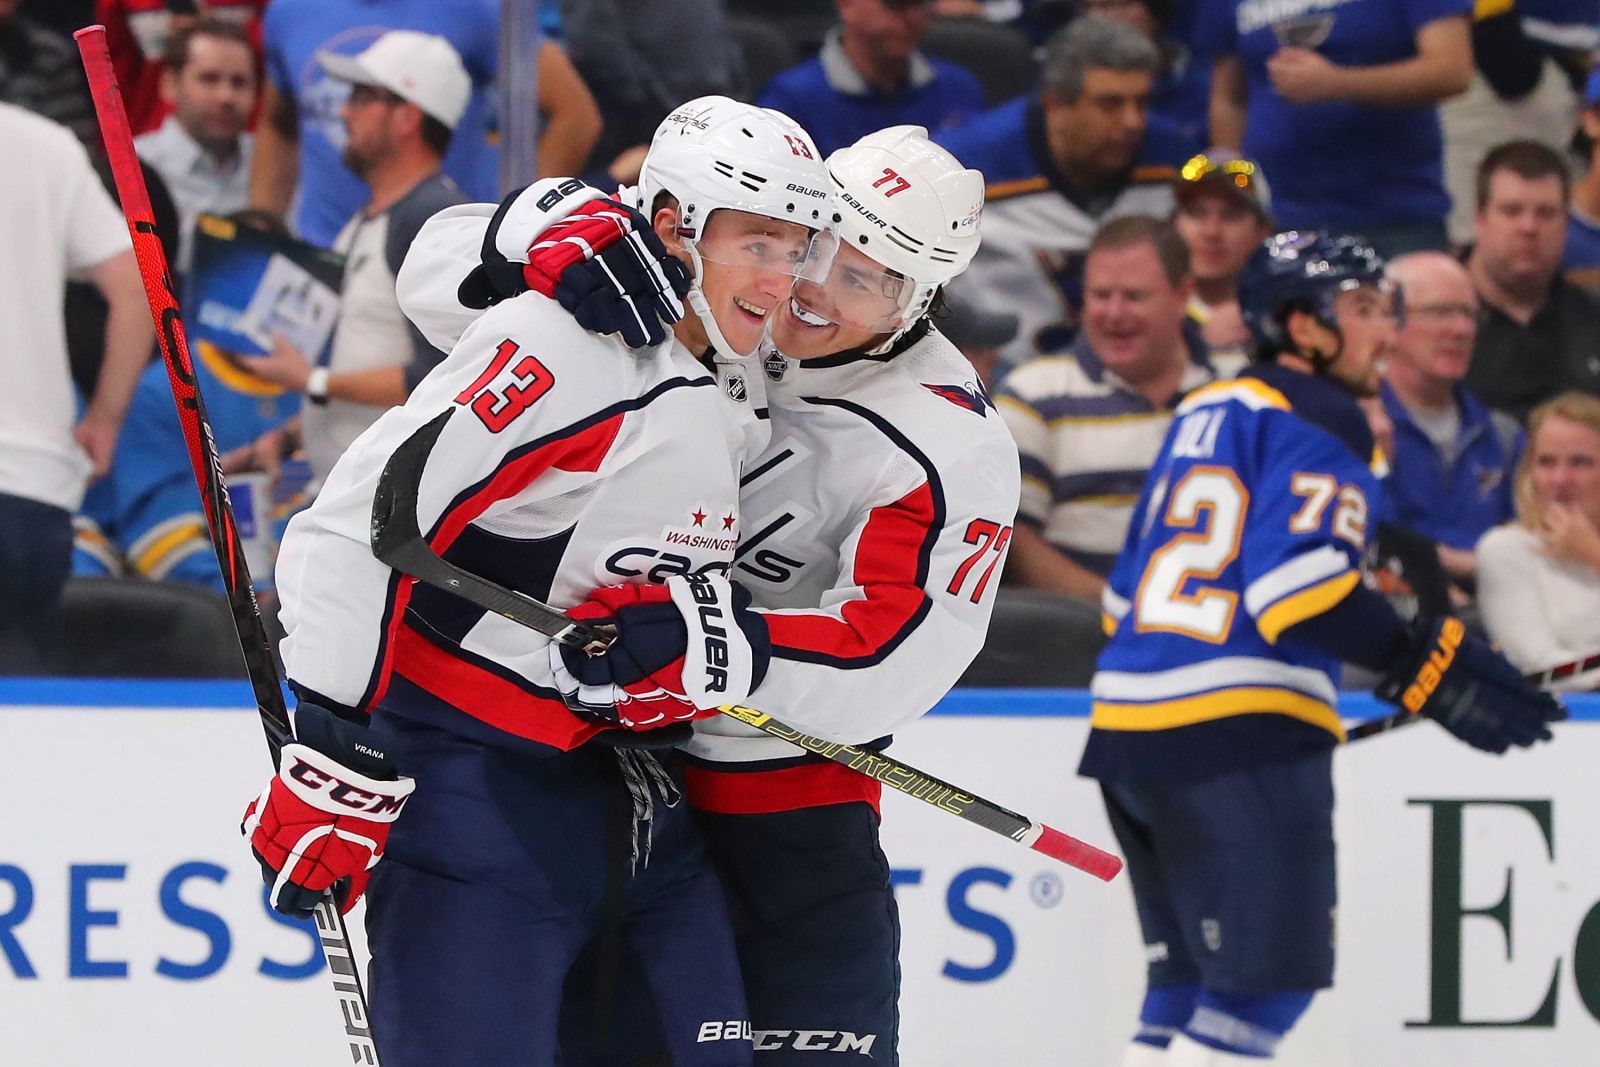 As Capitals thrive, the bond strengthens between T.J. Oshie and Jakub Vrana